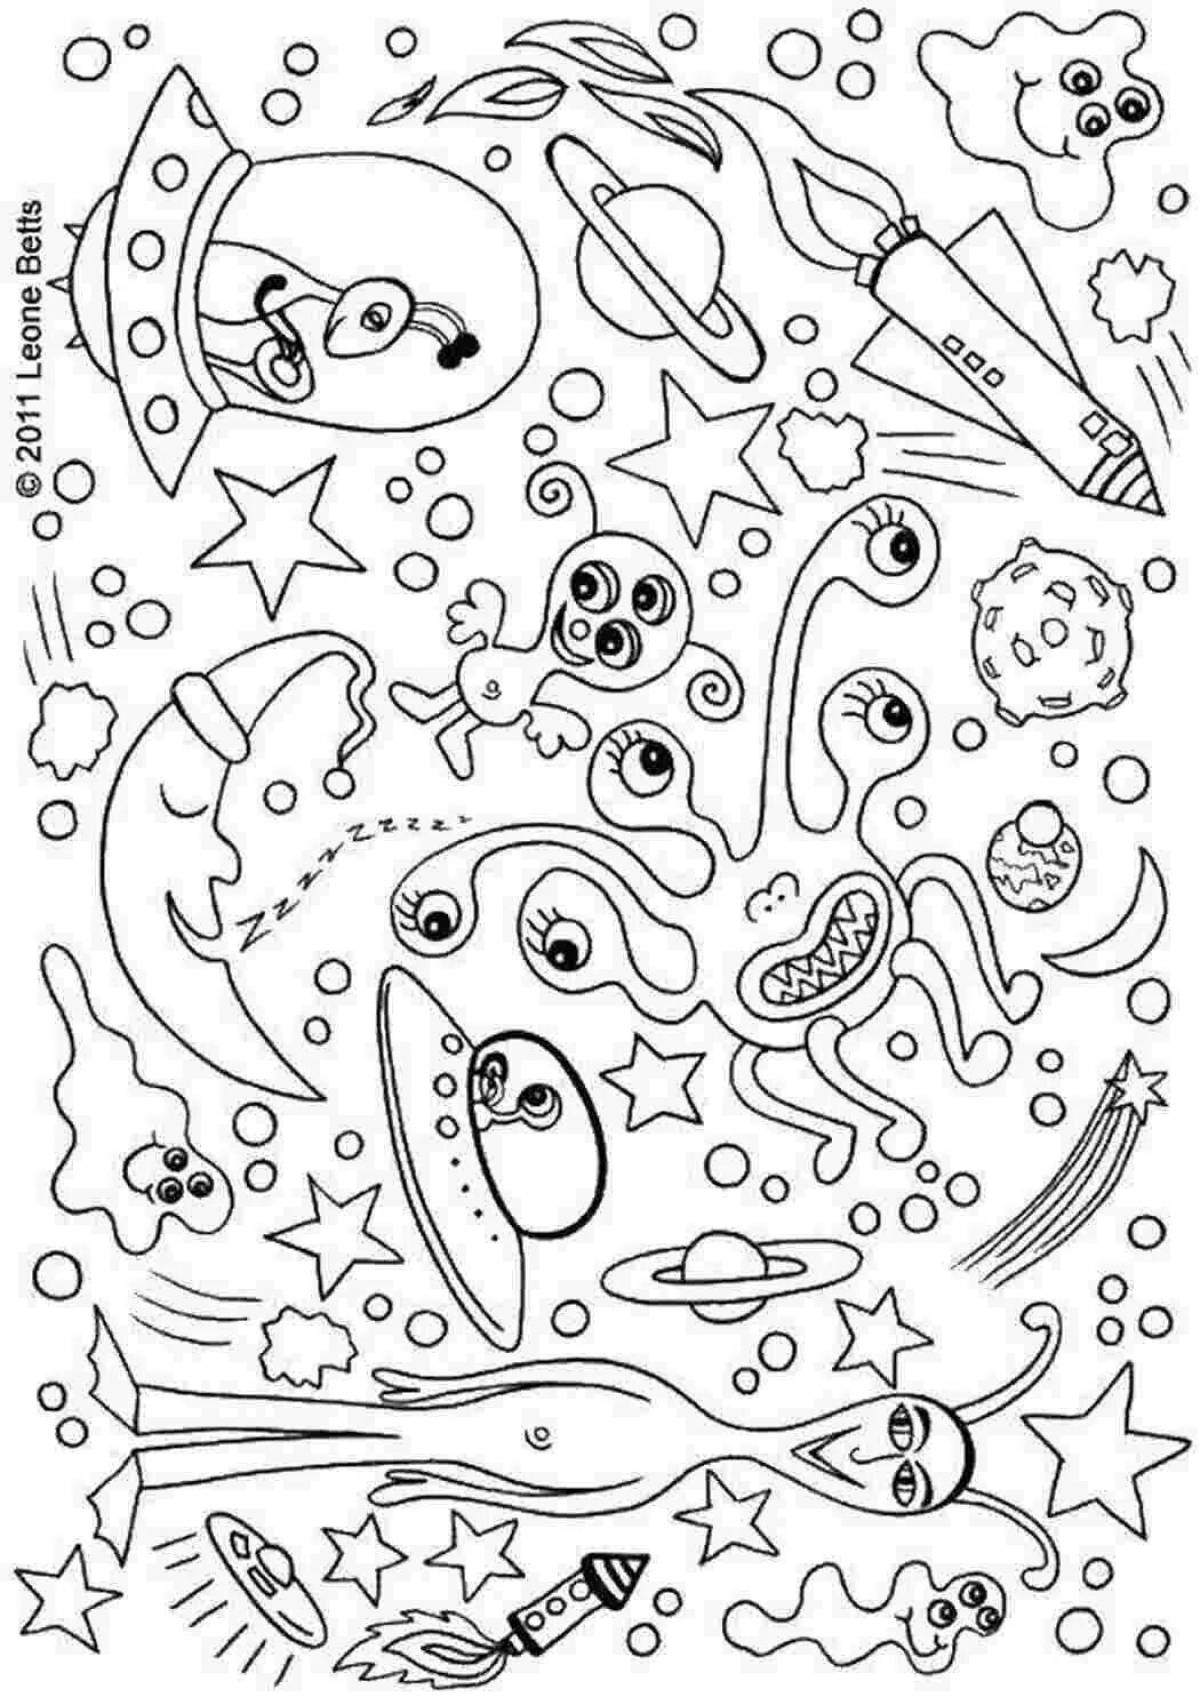 Coloring page charming space complex